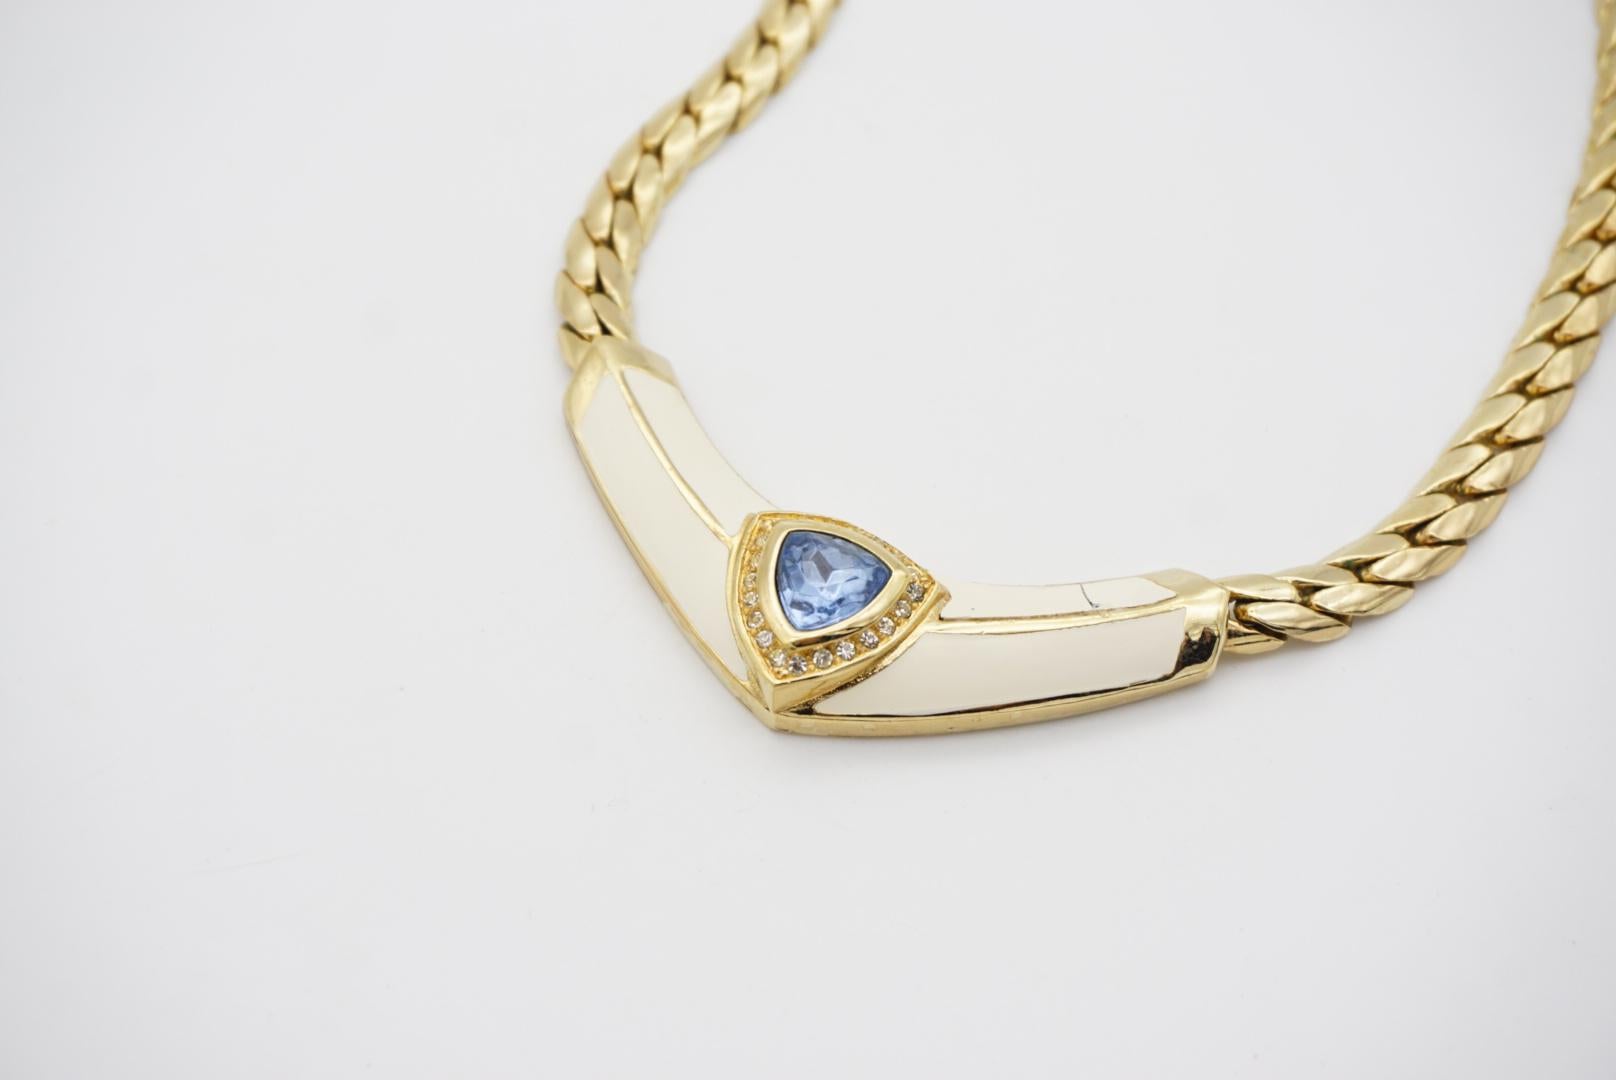 Christian Dior Vintage 1980s Aqua Blue Triangle Crystals Cream Gold Necklace For Sale 2